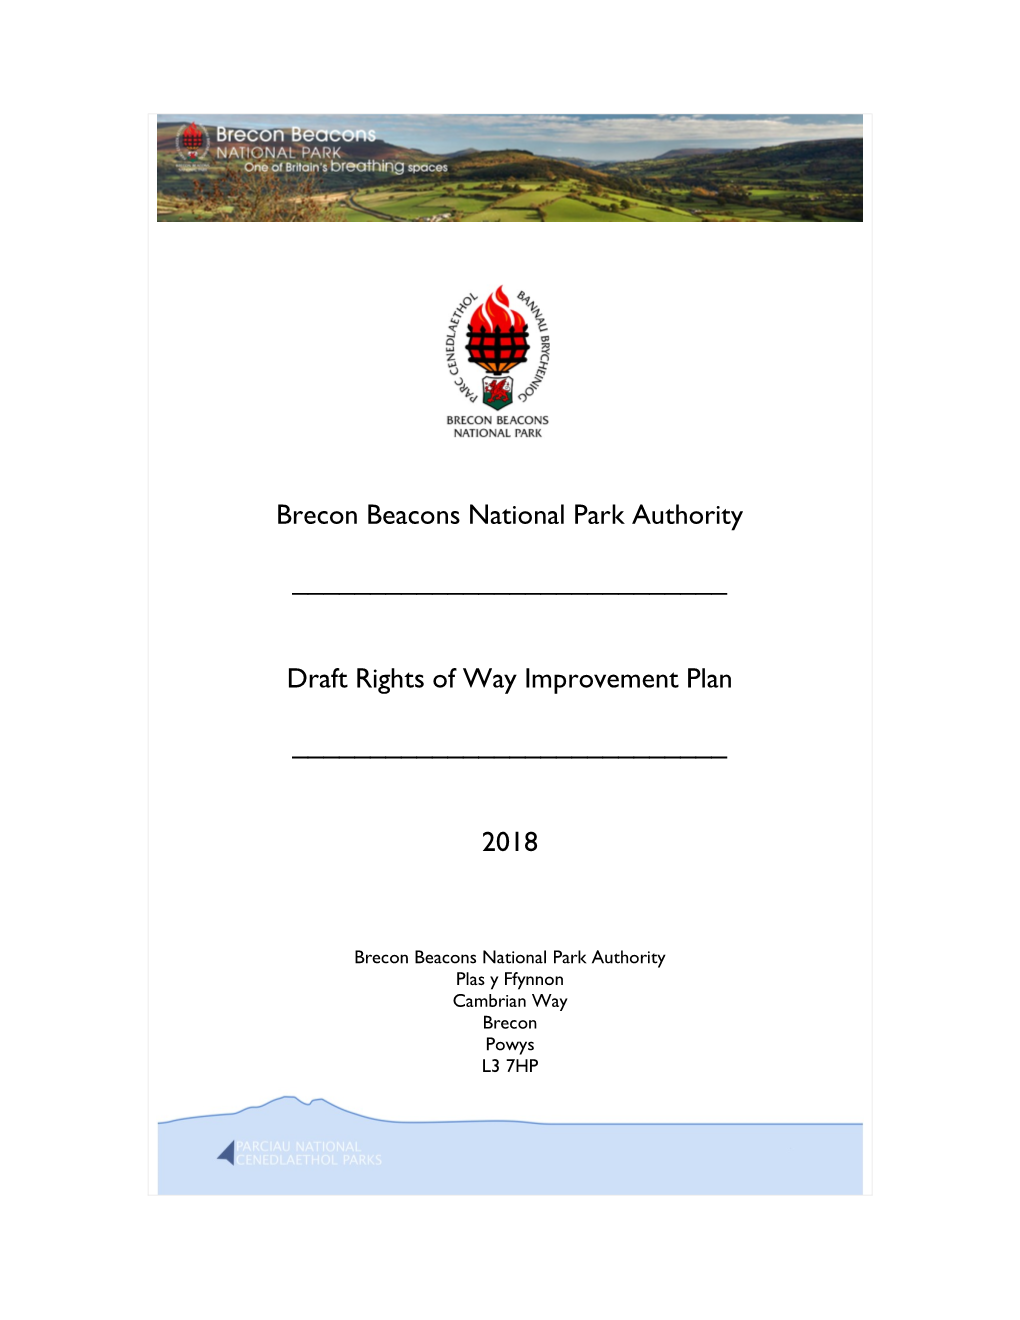 Brecon Beacons National Park Authority Draft Rights of Way Improvement Plan 2018